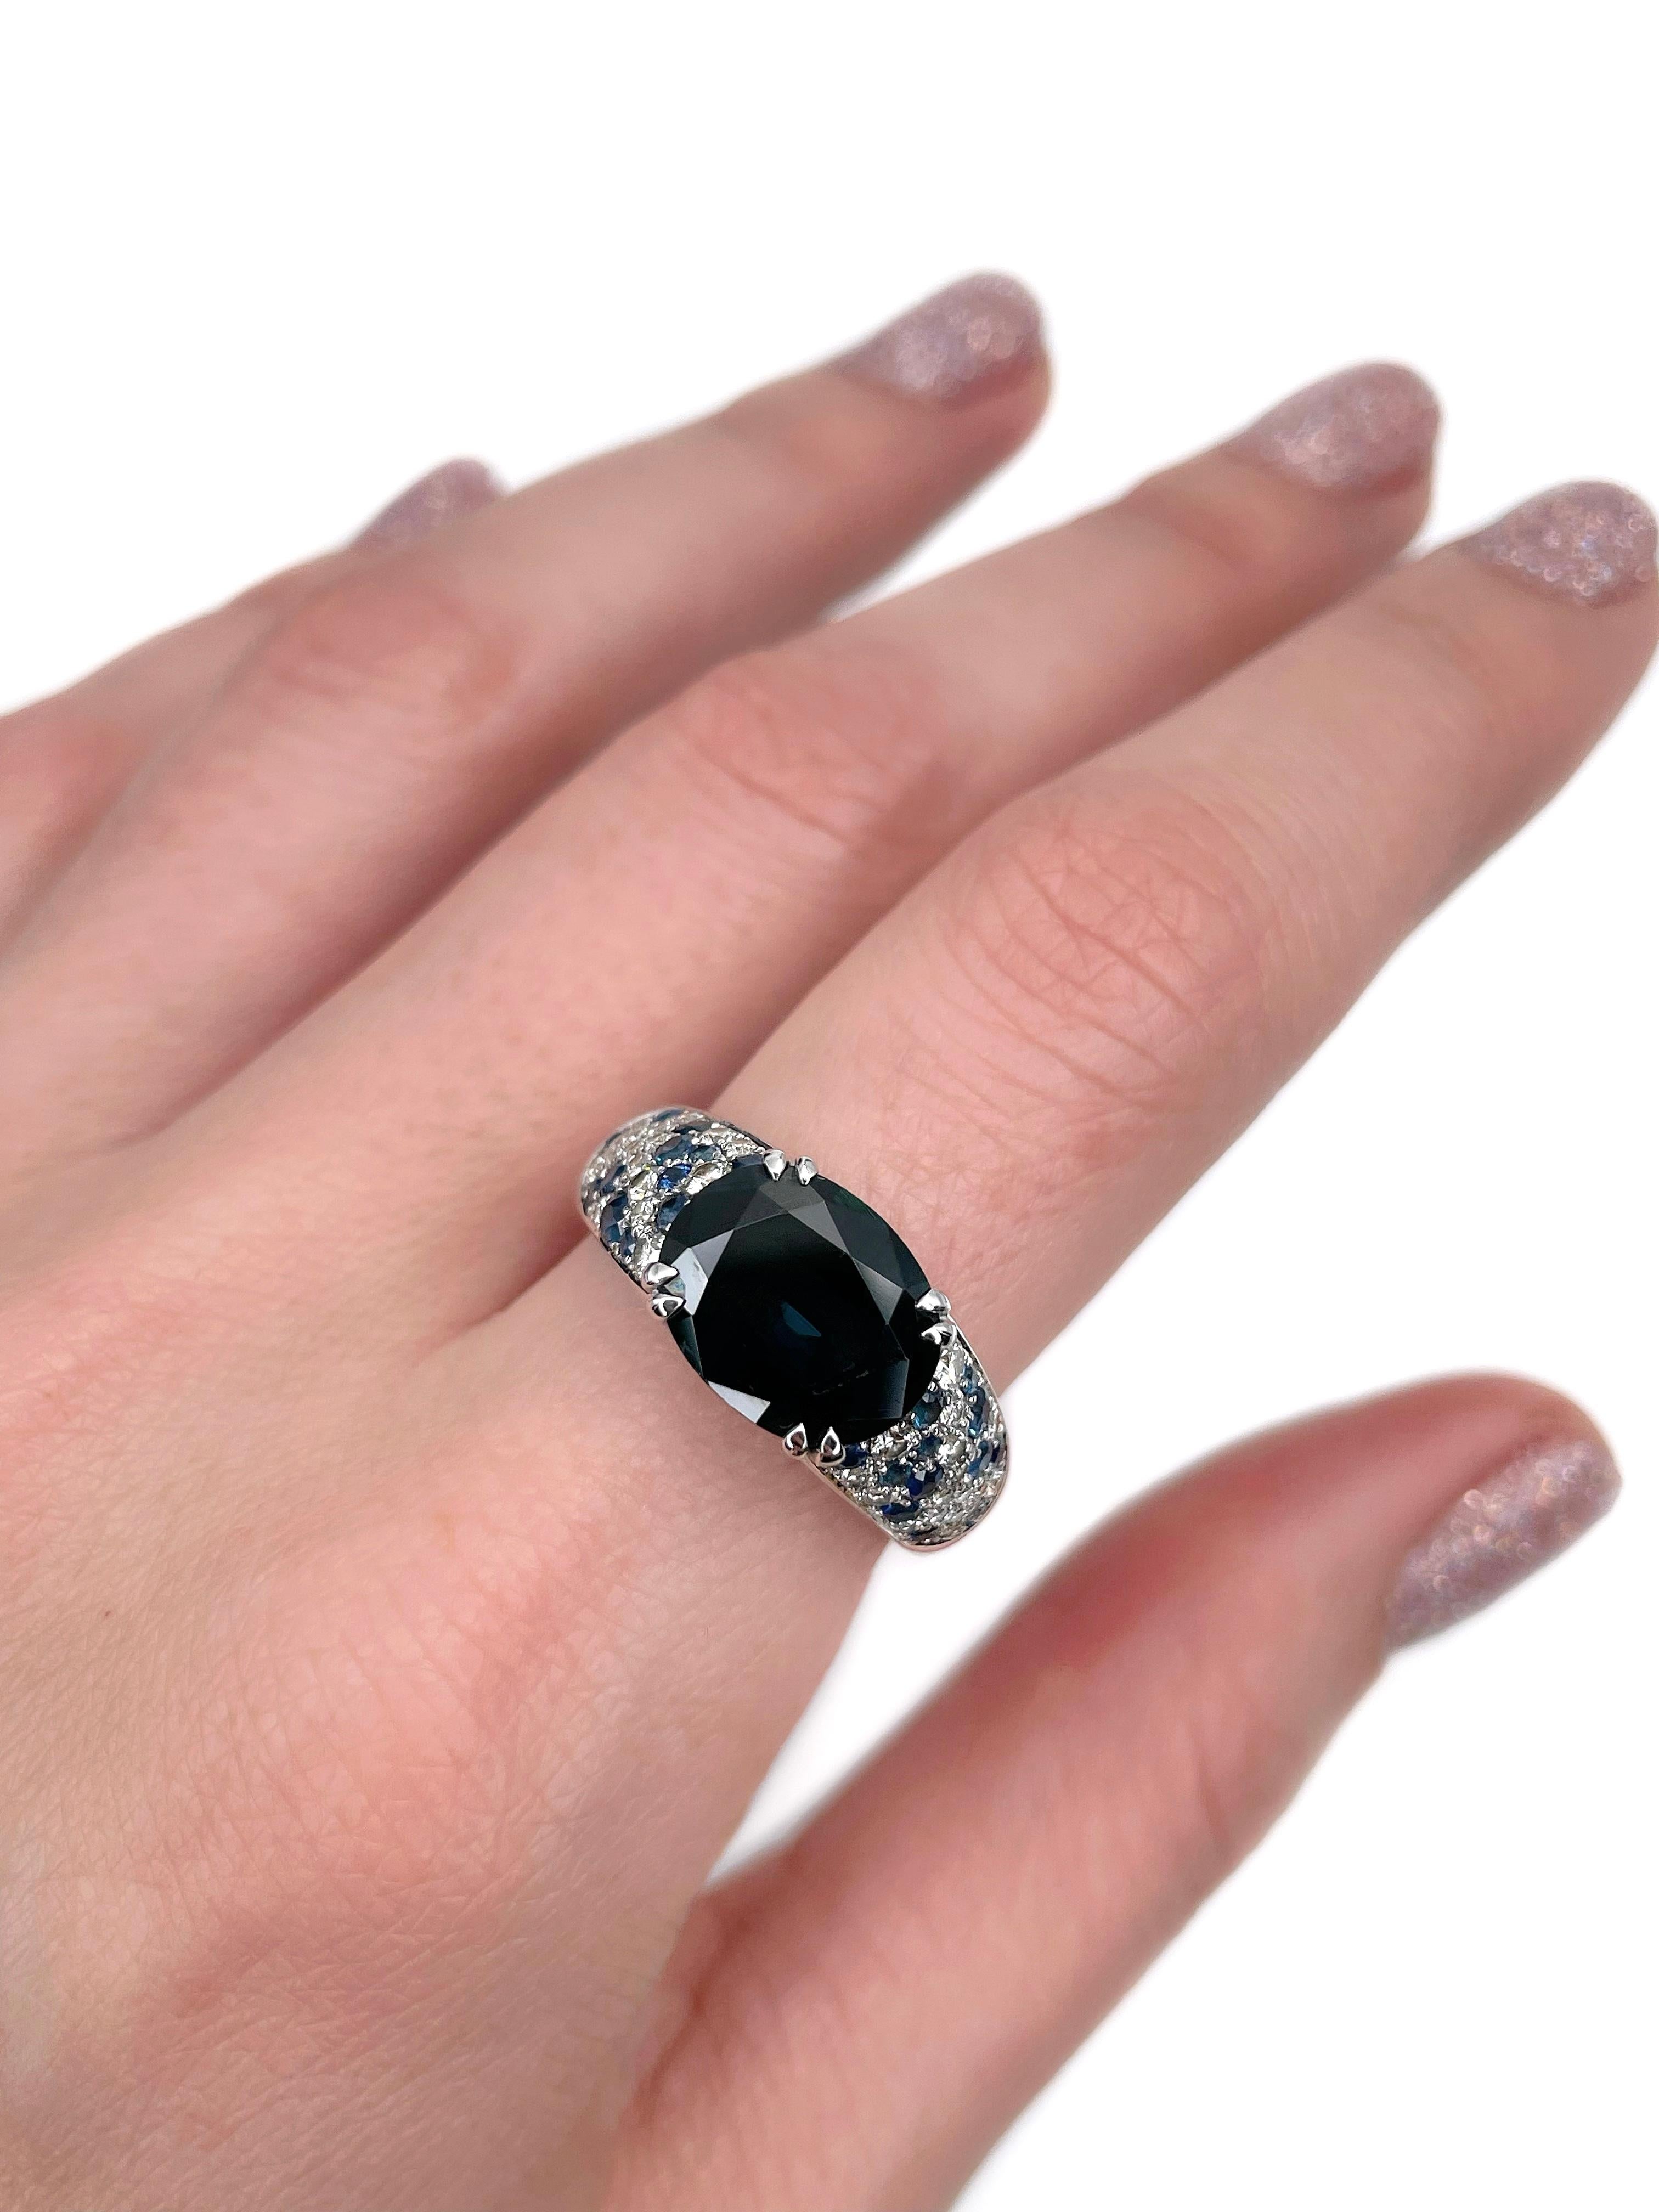 This is an amazing ring designed by Mauboussin for the “Nuit d’Amour” collection. Circa 2000. 

It is crafted in 18K white gold. The piece features:
- blue sapphires (central ~4.20ct, side TW ~0.62ct)
- round brilliant cut diamonds (TW